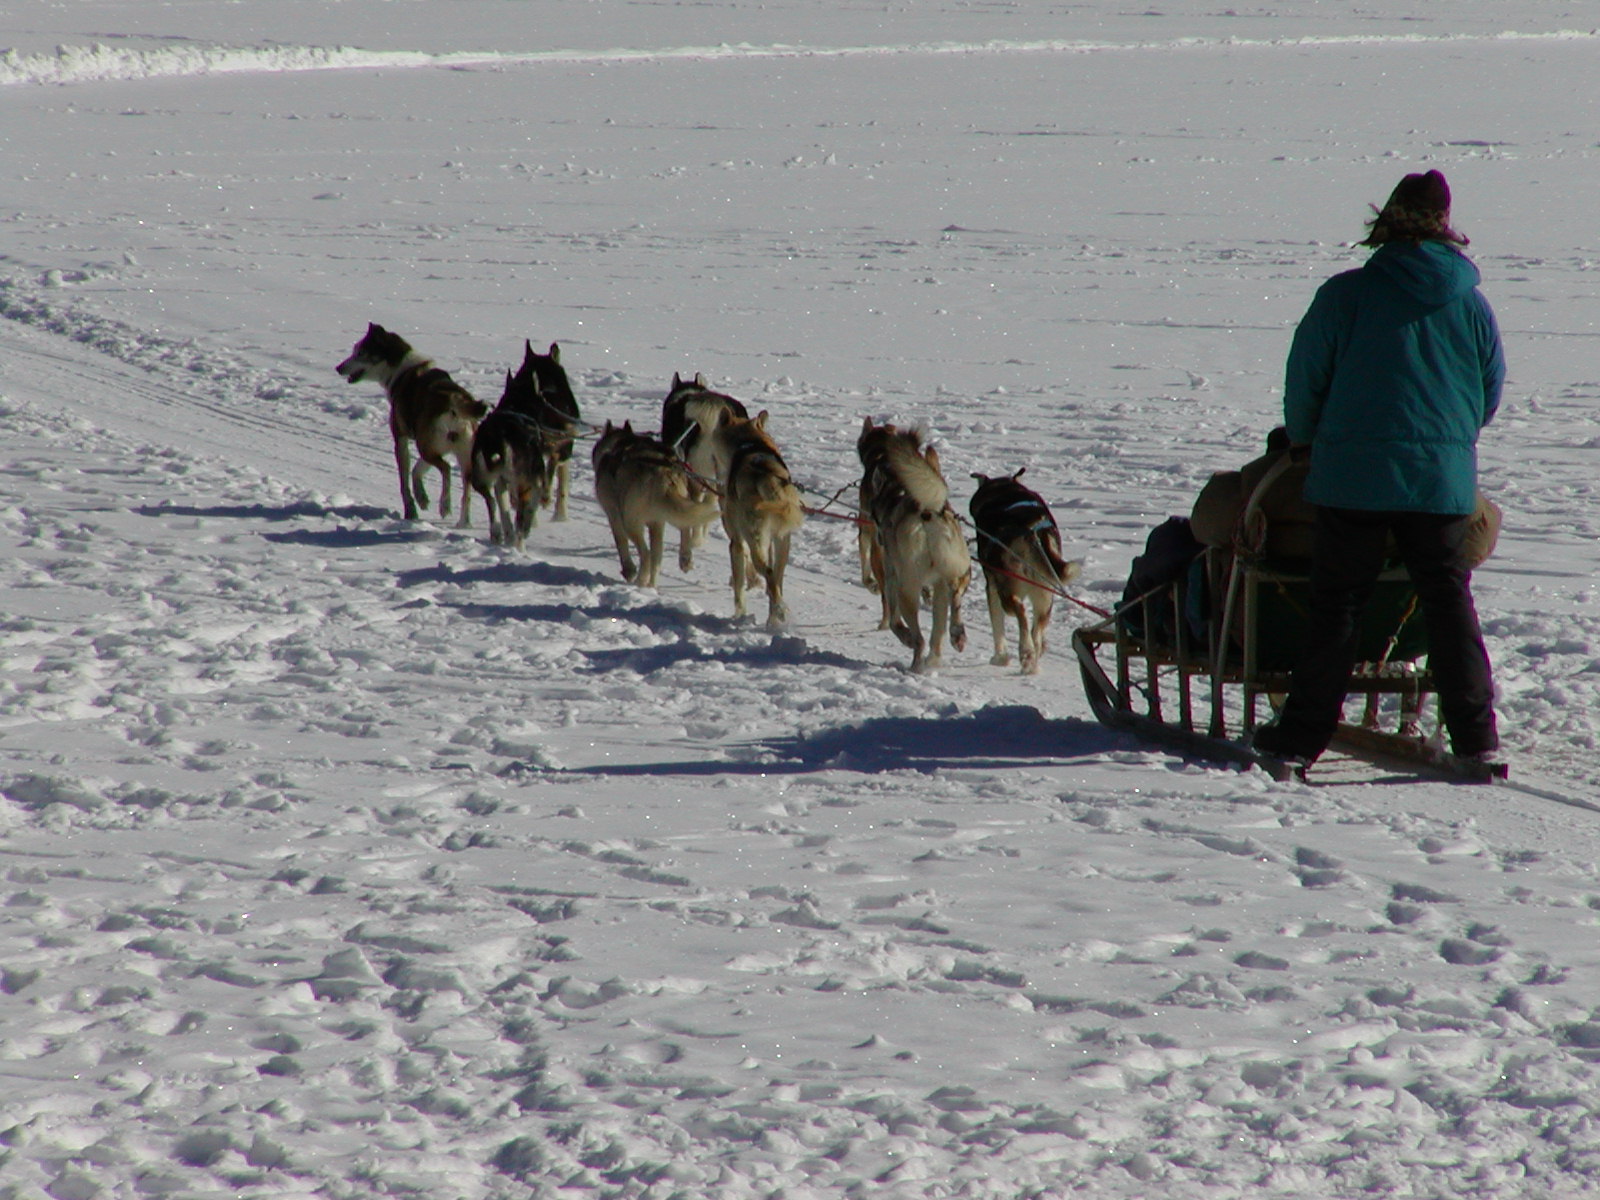 a woman riding on a snow covered sled pulled by many dogs